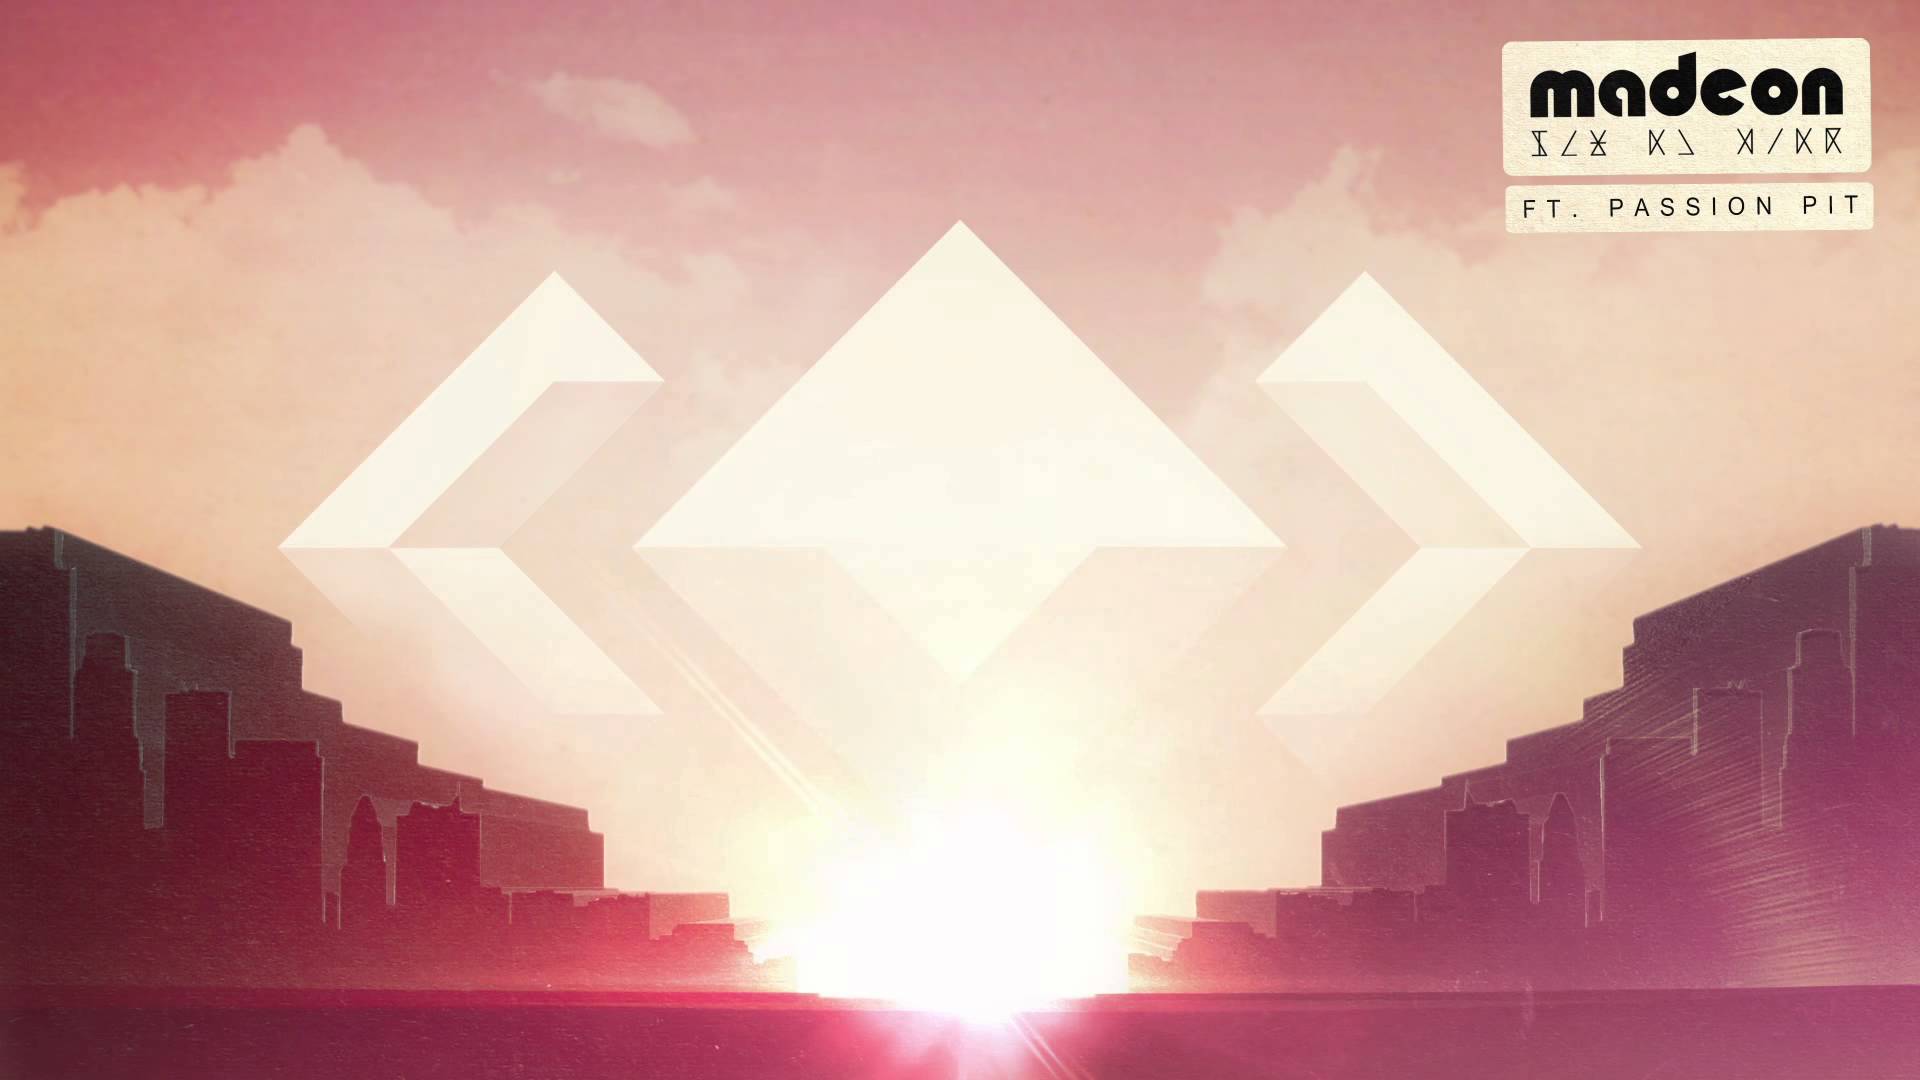 Madeon - Pay No Mind ft. Passion Pit - YouTube